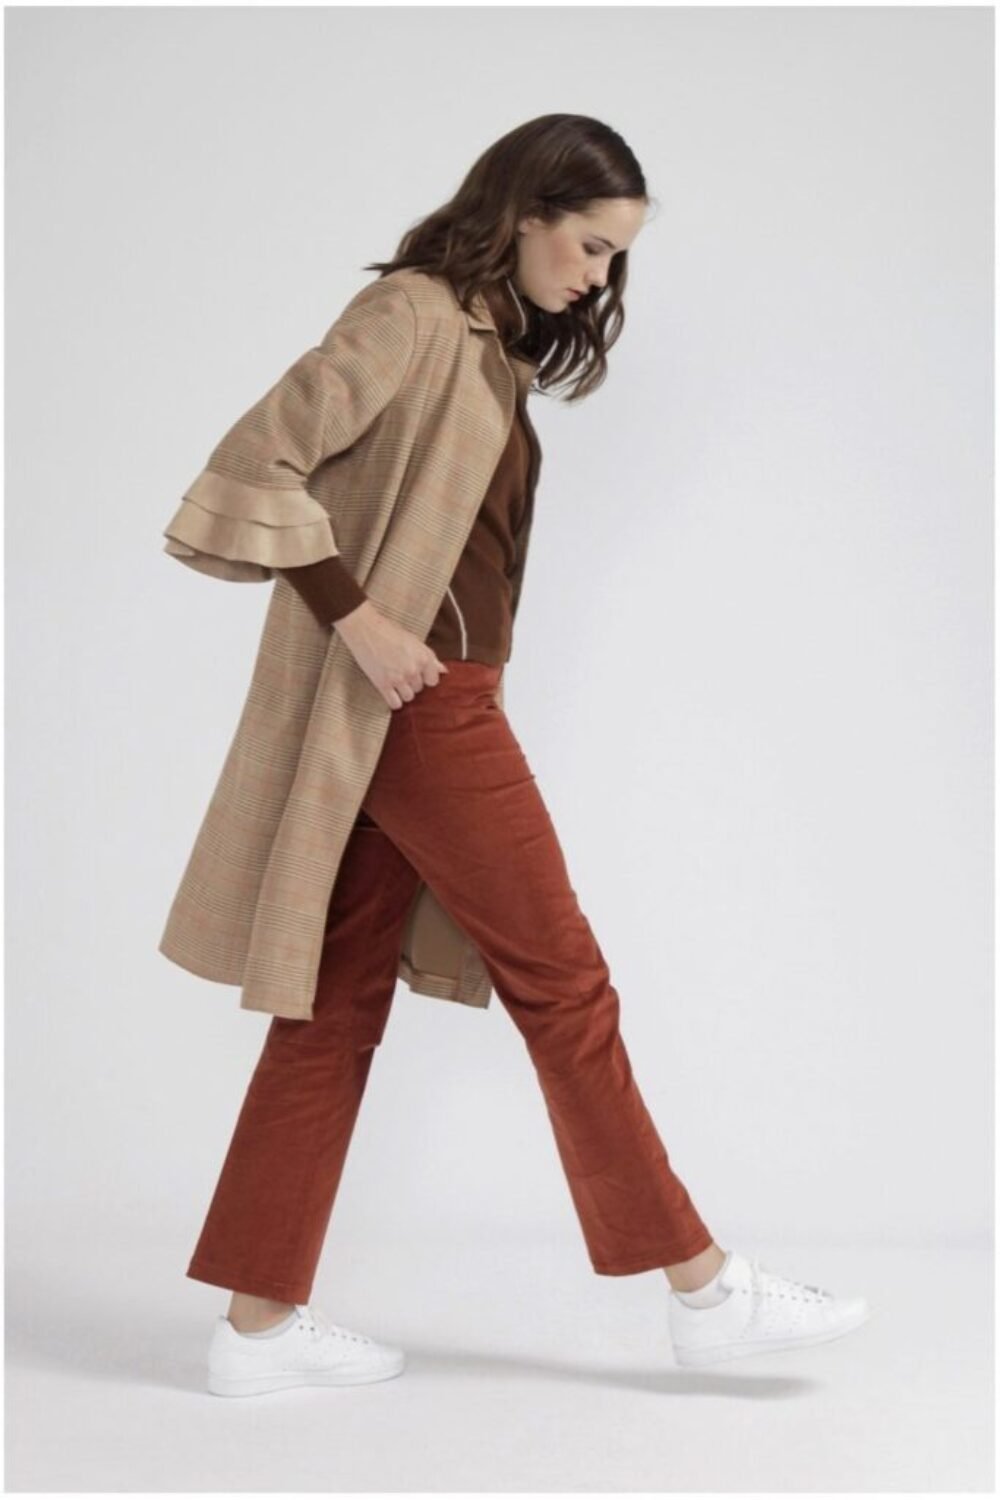 Shop Lux Mocha Check Faux Suede Long Jacket and women's luxury and designer clothes at www.lux-apparel.co.uk